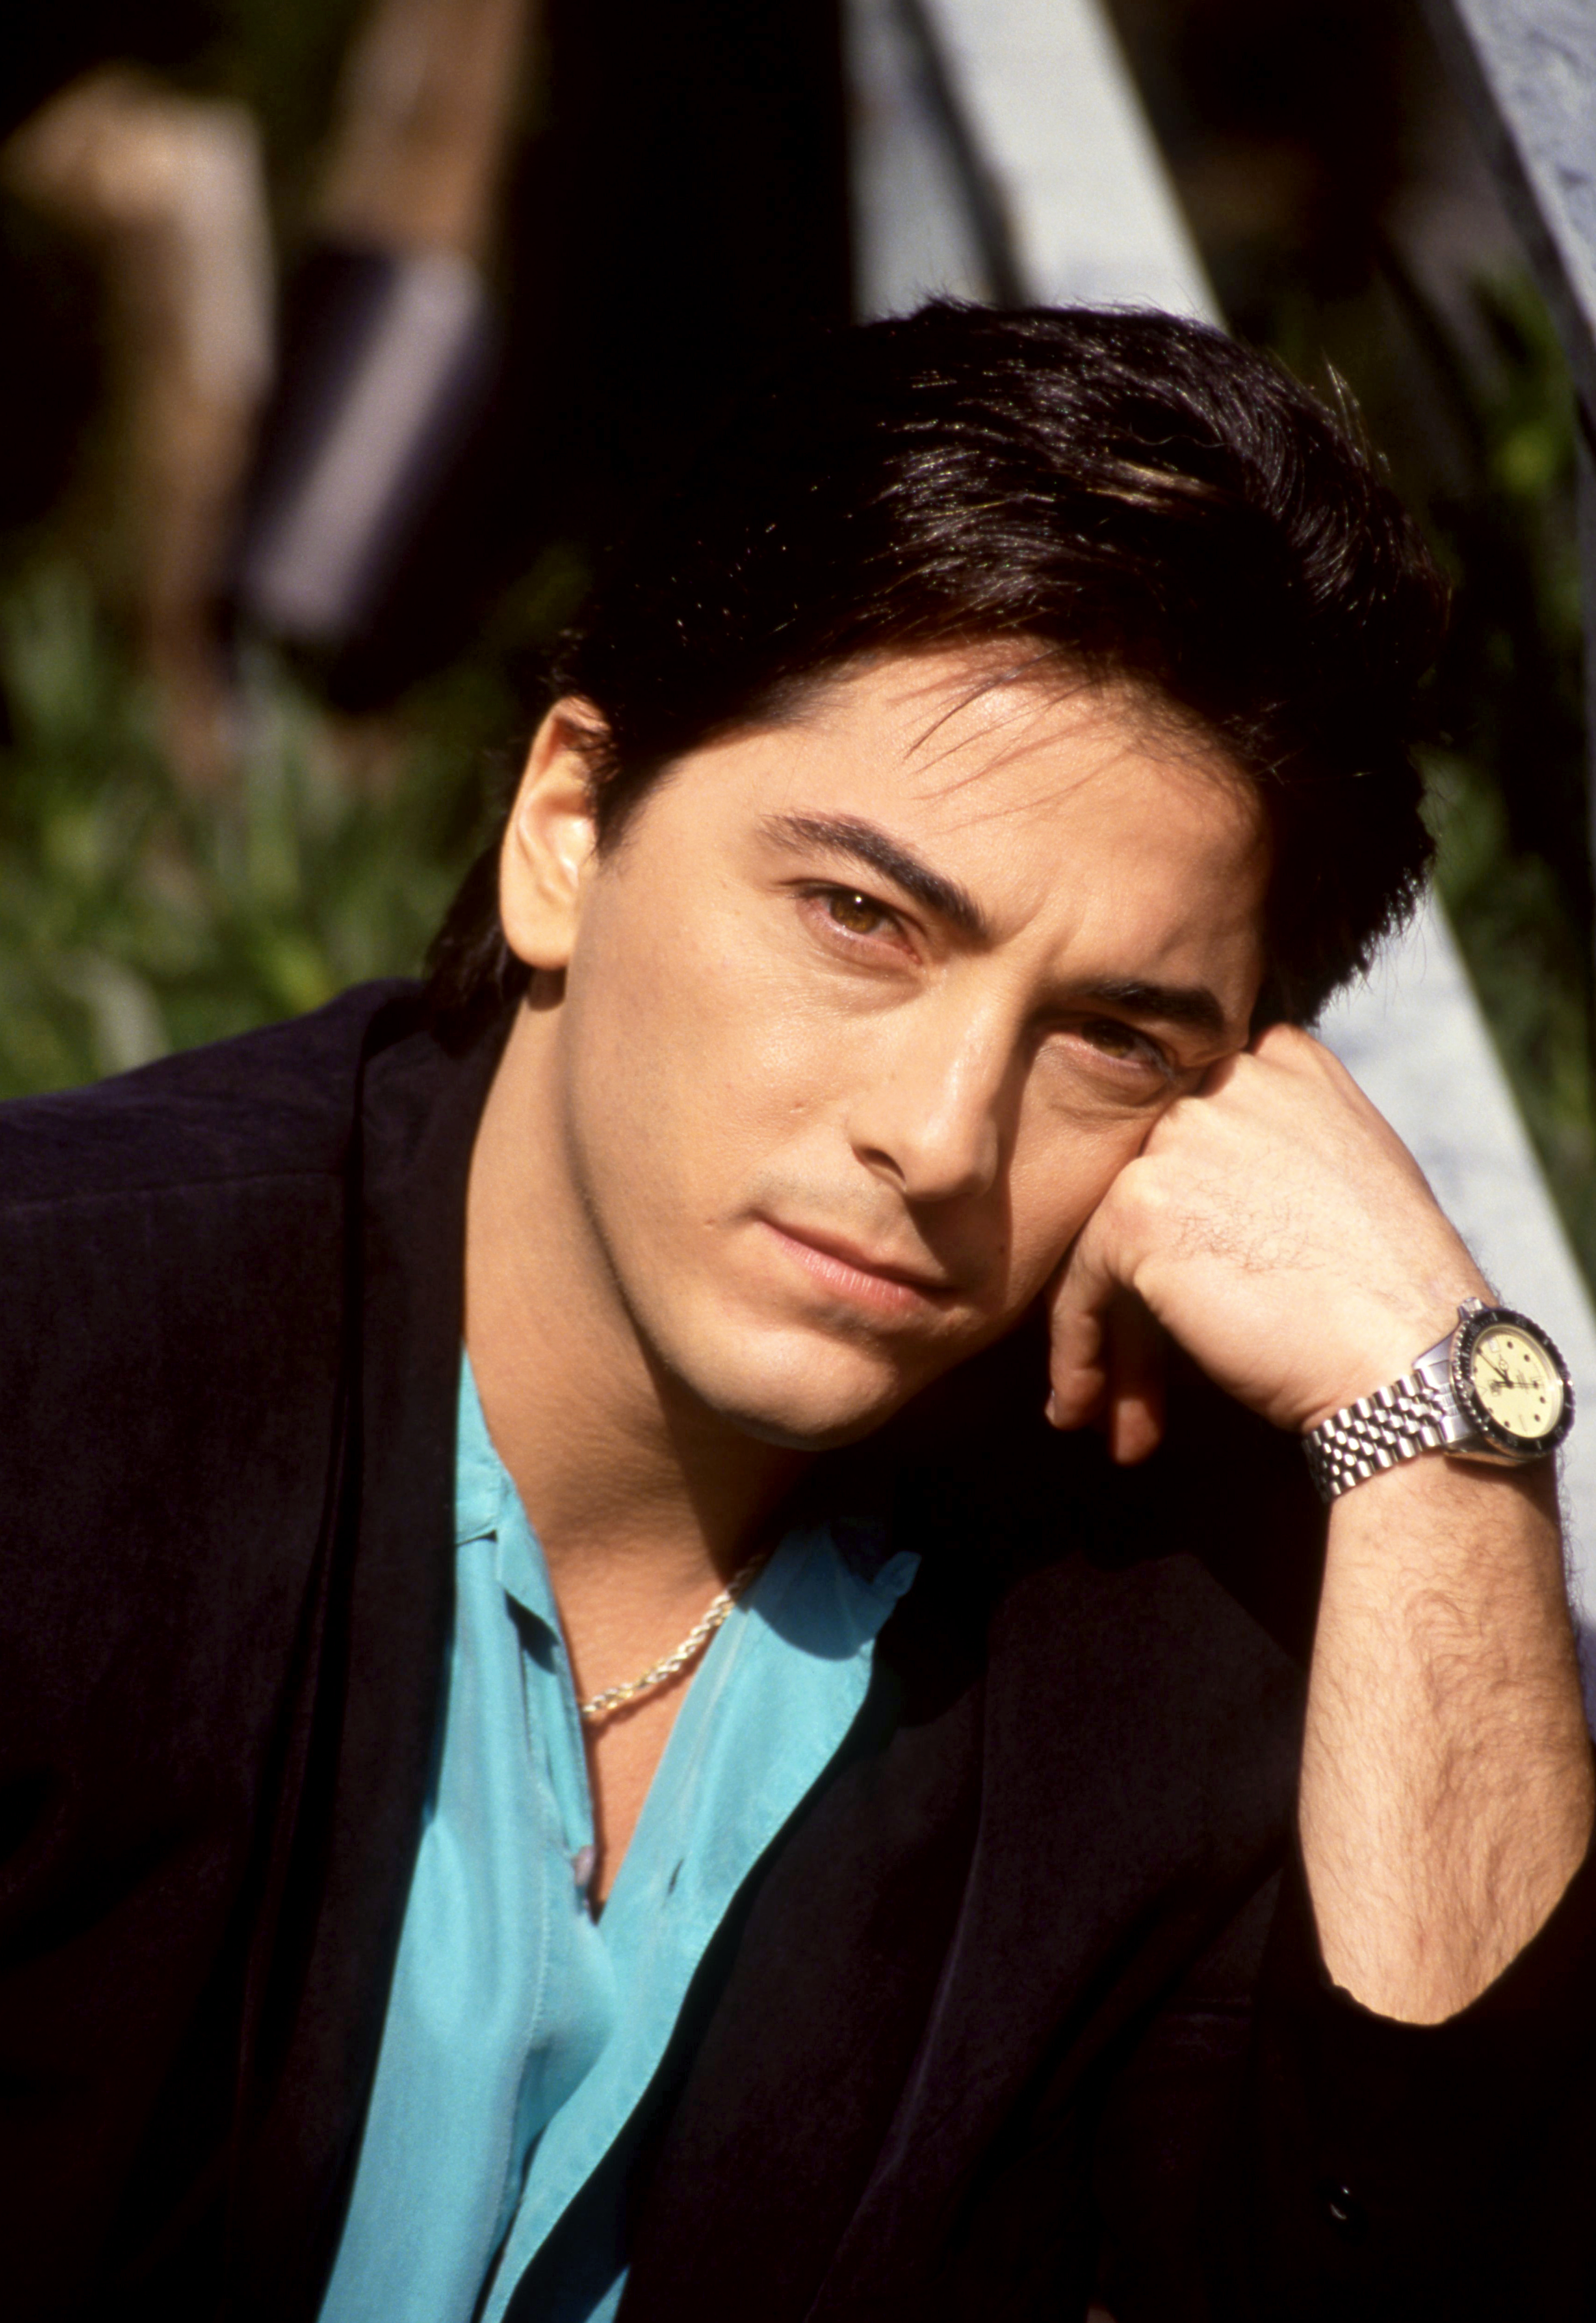 Scott Baio on February 19, 1992 in Los Angeles, California | Source: Getty Images